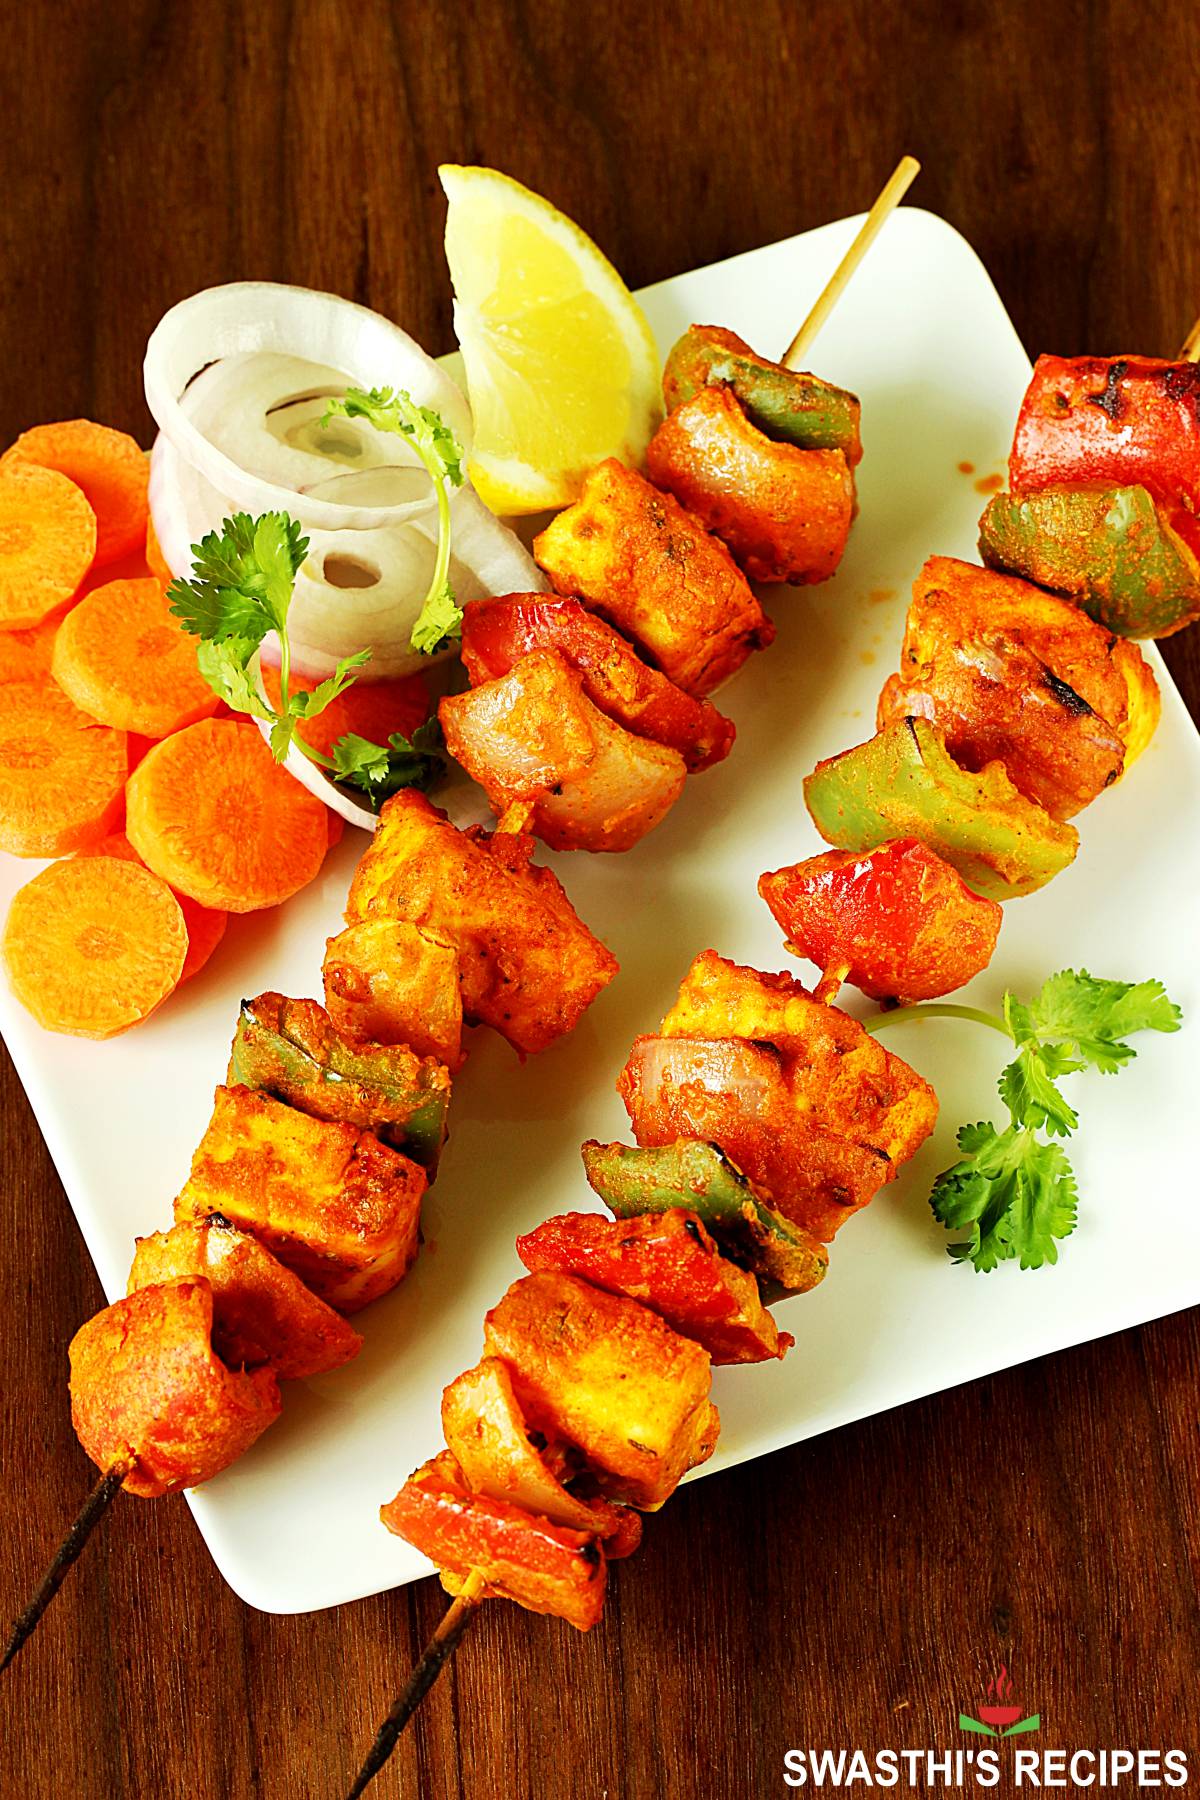 Paneer Tikka, a tandoori appetizer made with paneer and spices